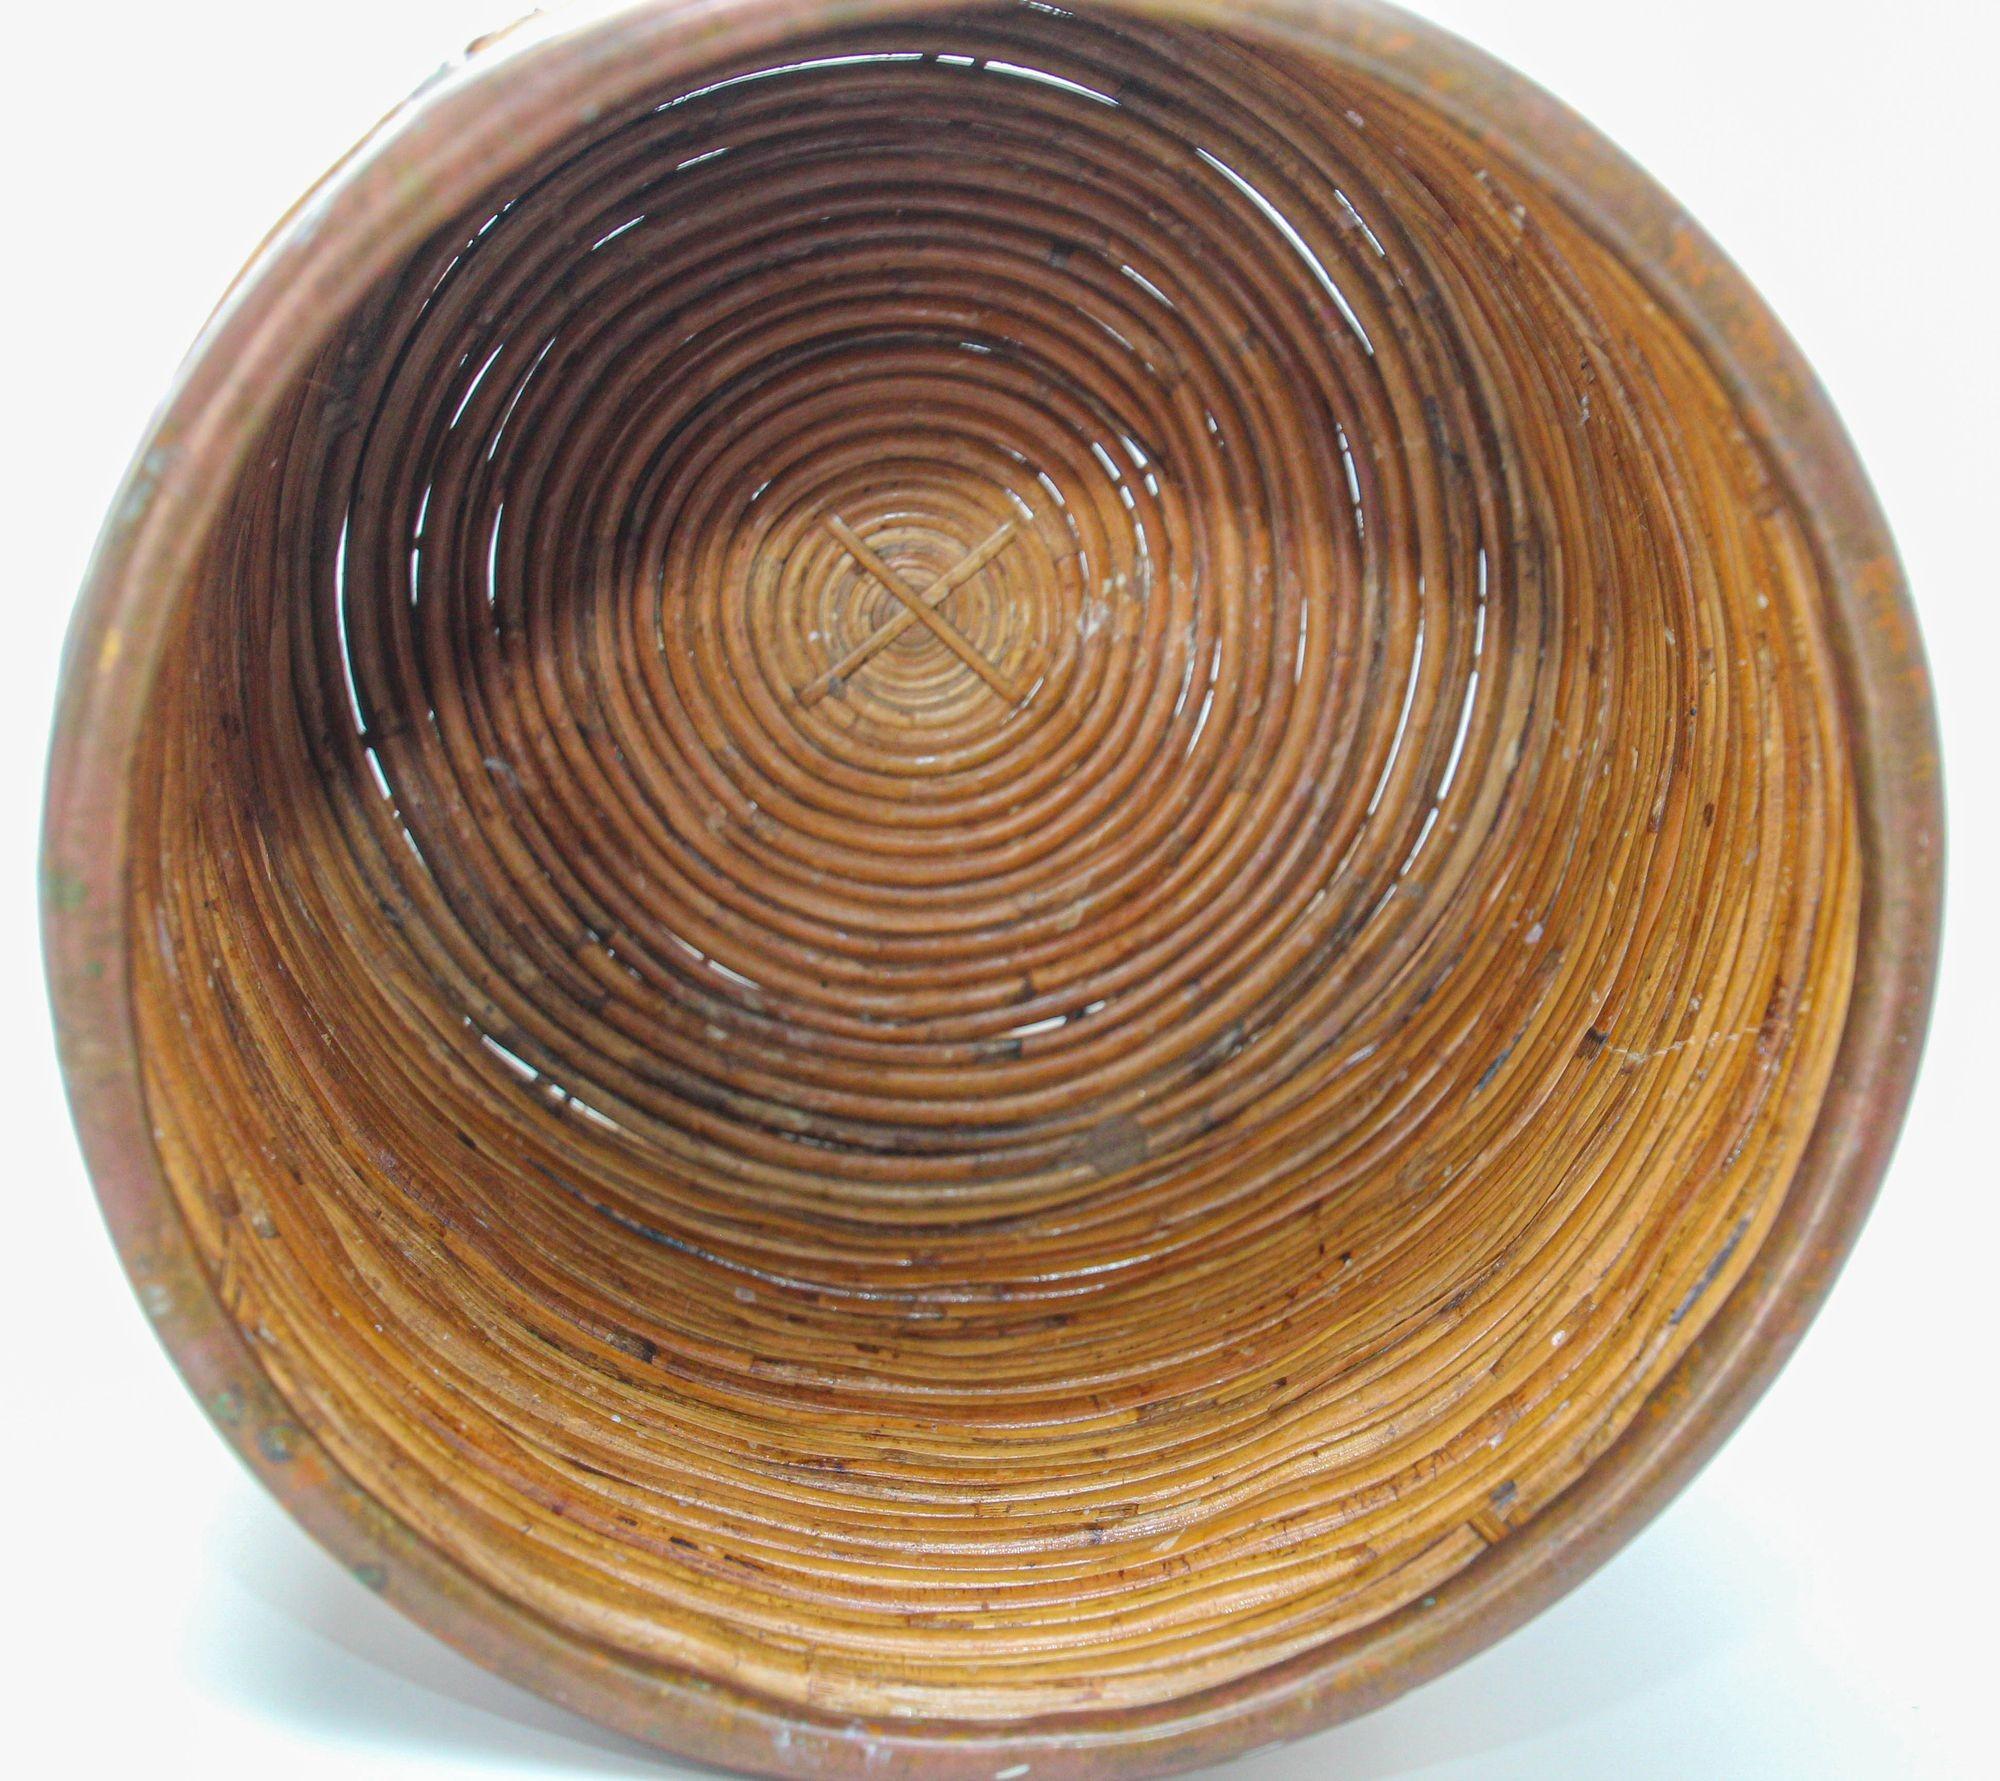 Large Rattan Bamboo Round Planter Brass Rim Italy, 1970s For Sale 10